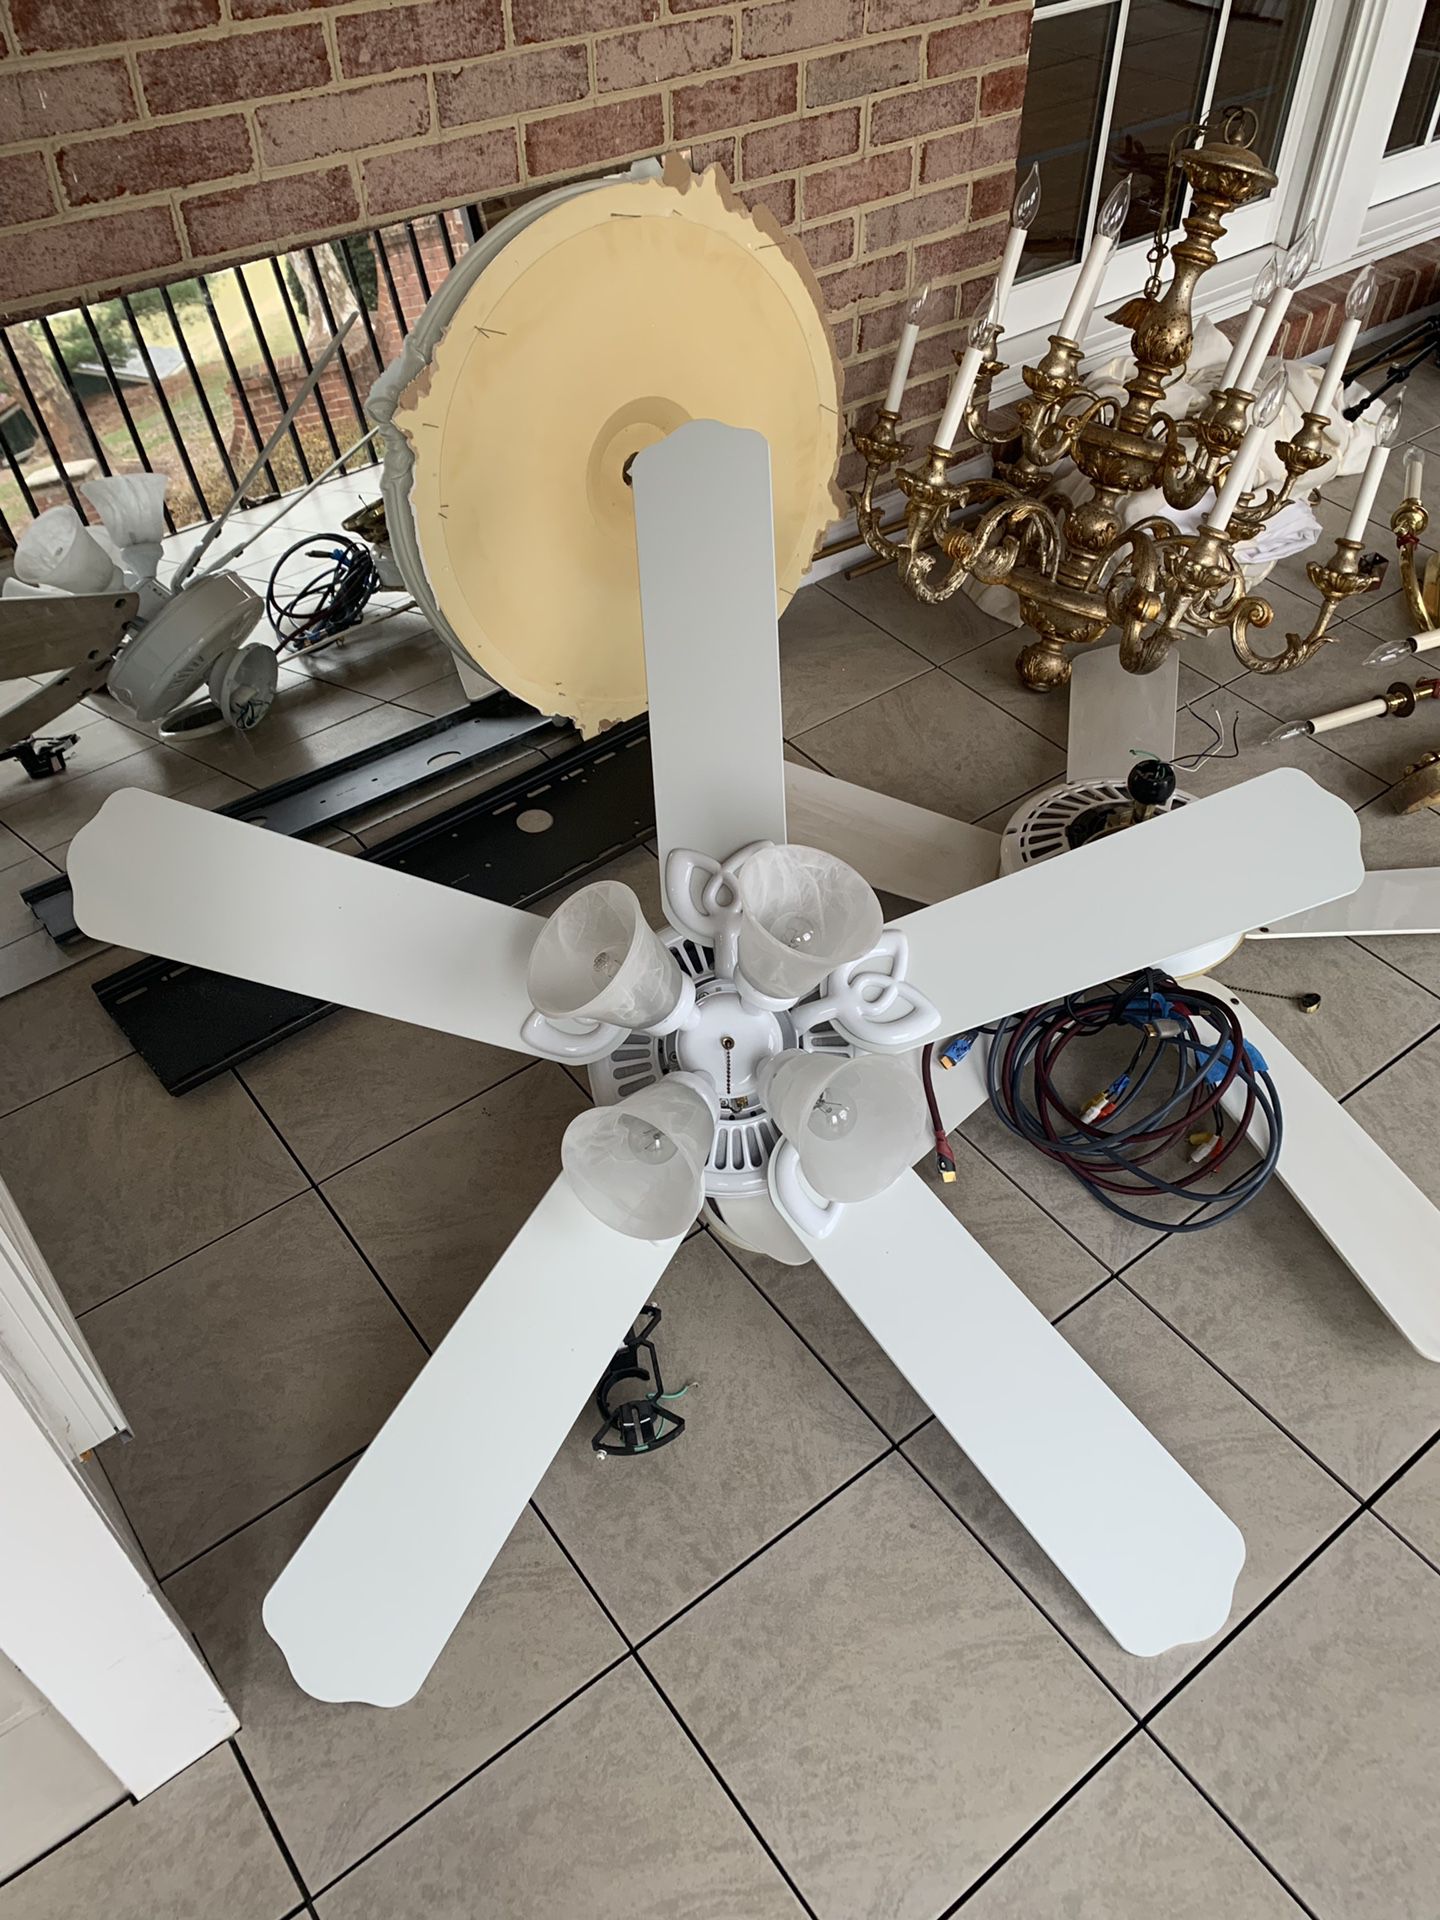 Two ceiling fans